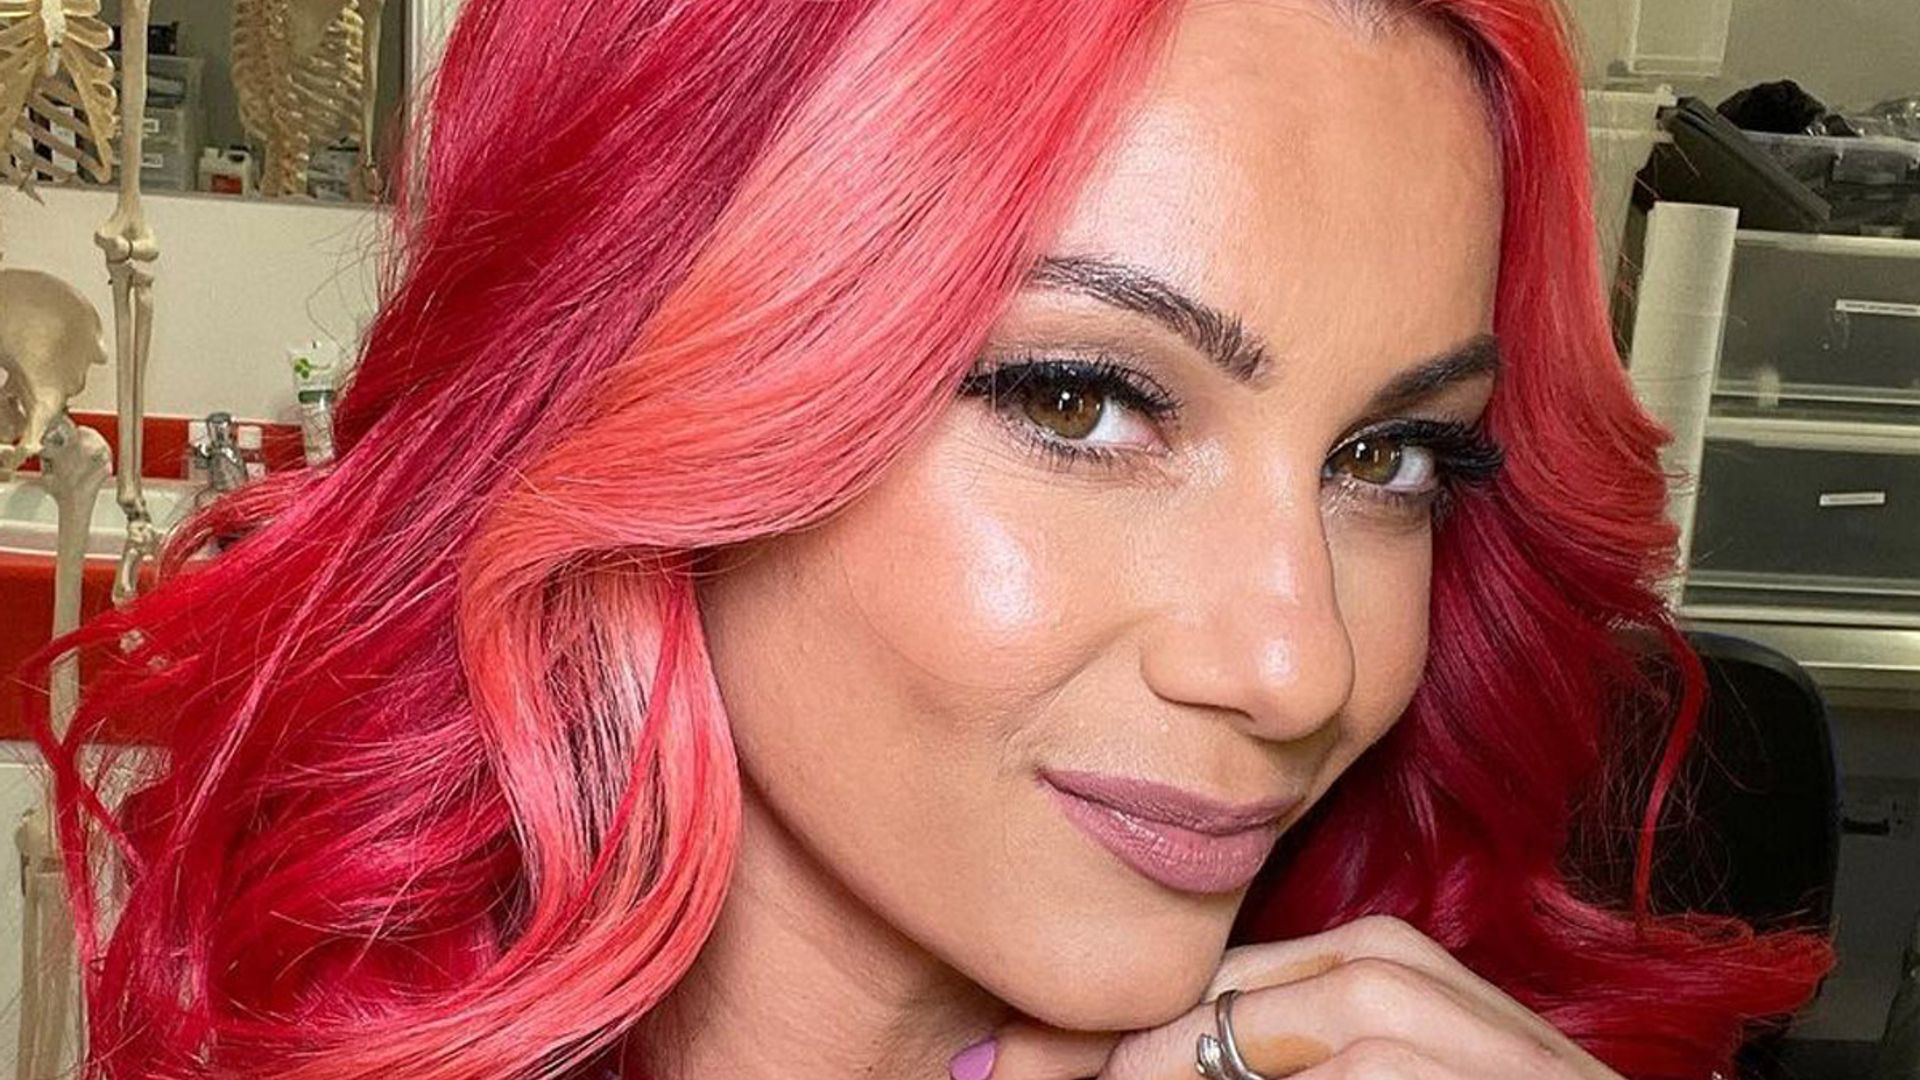 Strictly's Dianne Buswell debuts unreal hair transformation after years of red